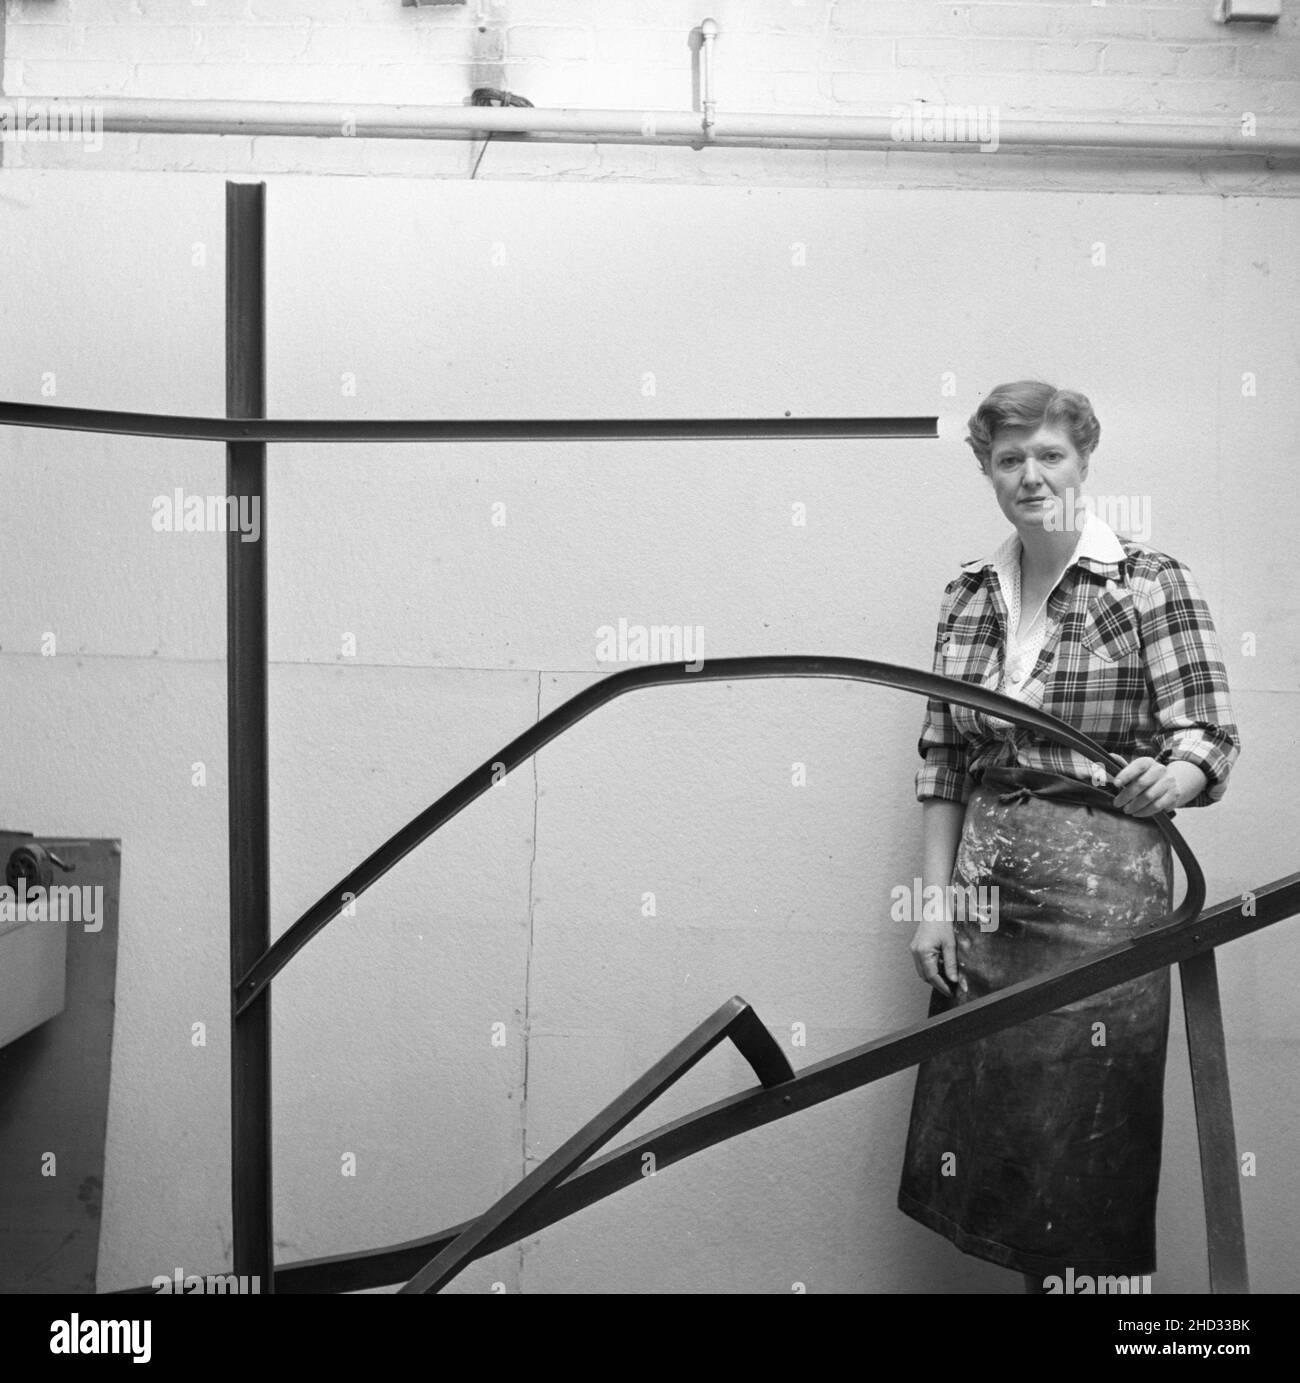 Mary Callery, sculptor, in her workshop, 1950. The exact date in unknown, but the year is 1950. The location is also unknown, though it is likely New York City. Stock Photo